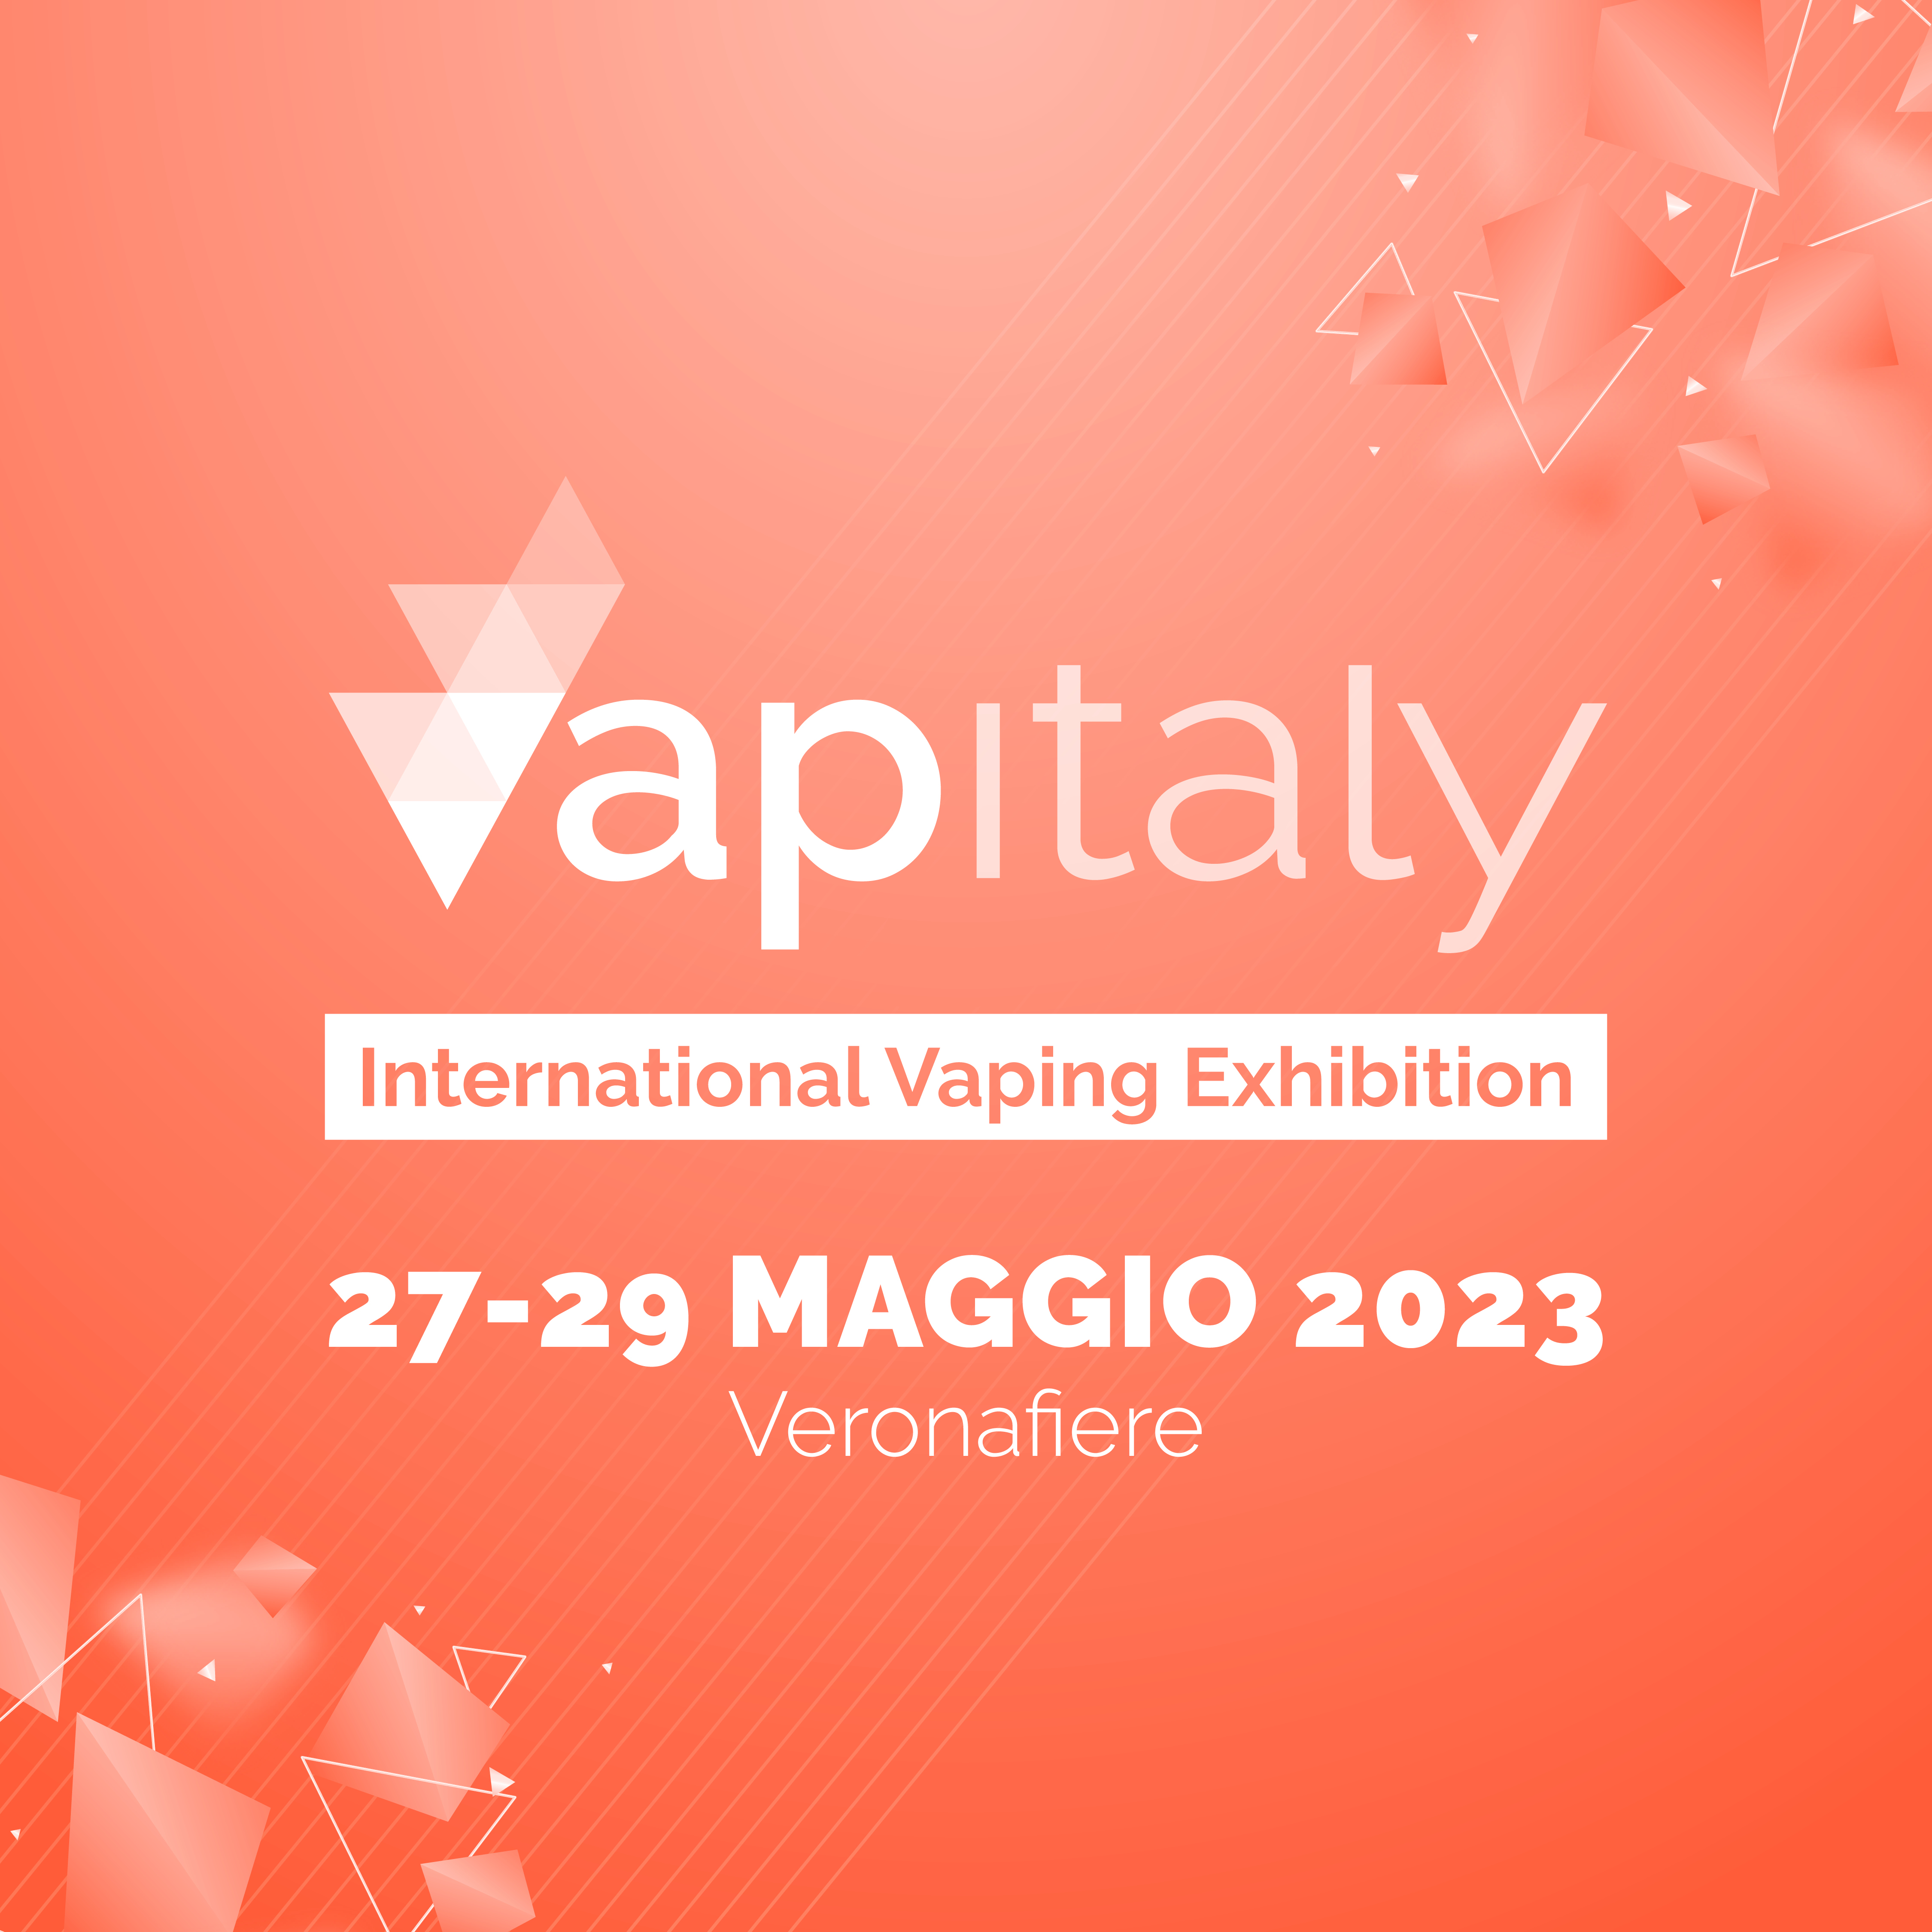 The world’s biggest vaping event. In Verona, from 27 to 29 May 2023. Agreement signed between Vapitaly and the Chinese exhibition IECIE